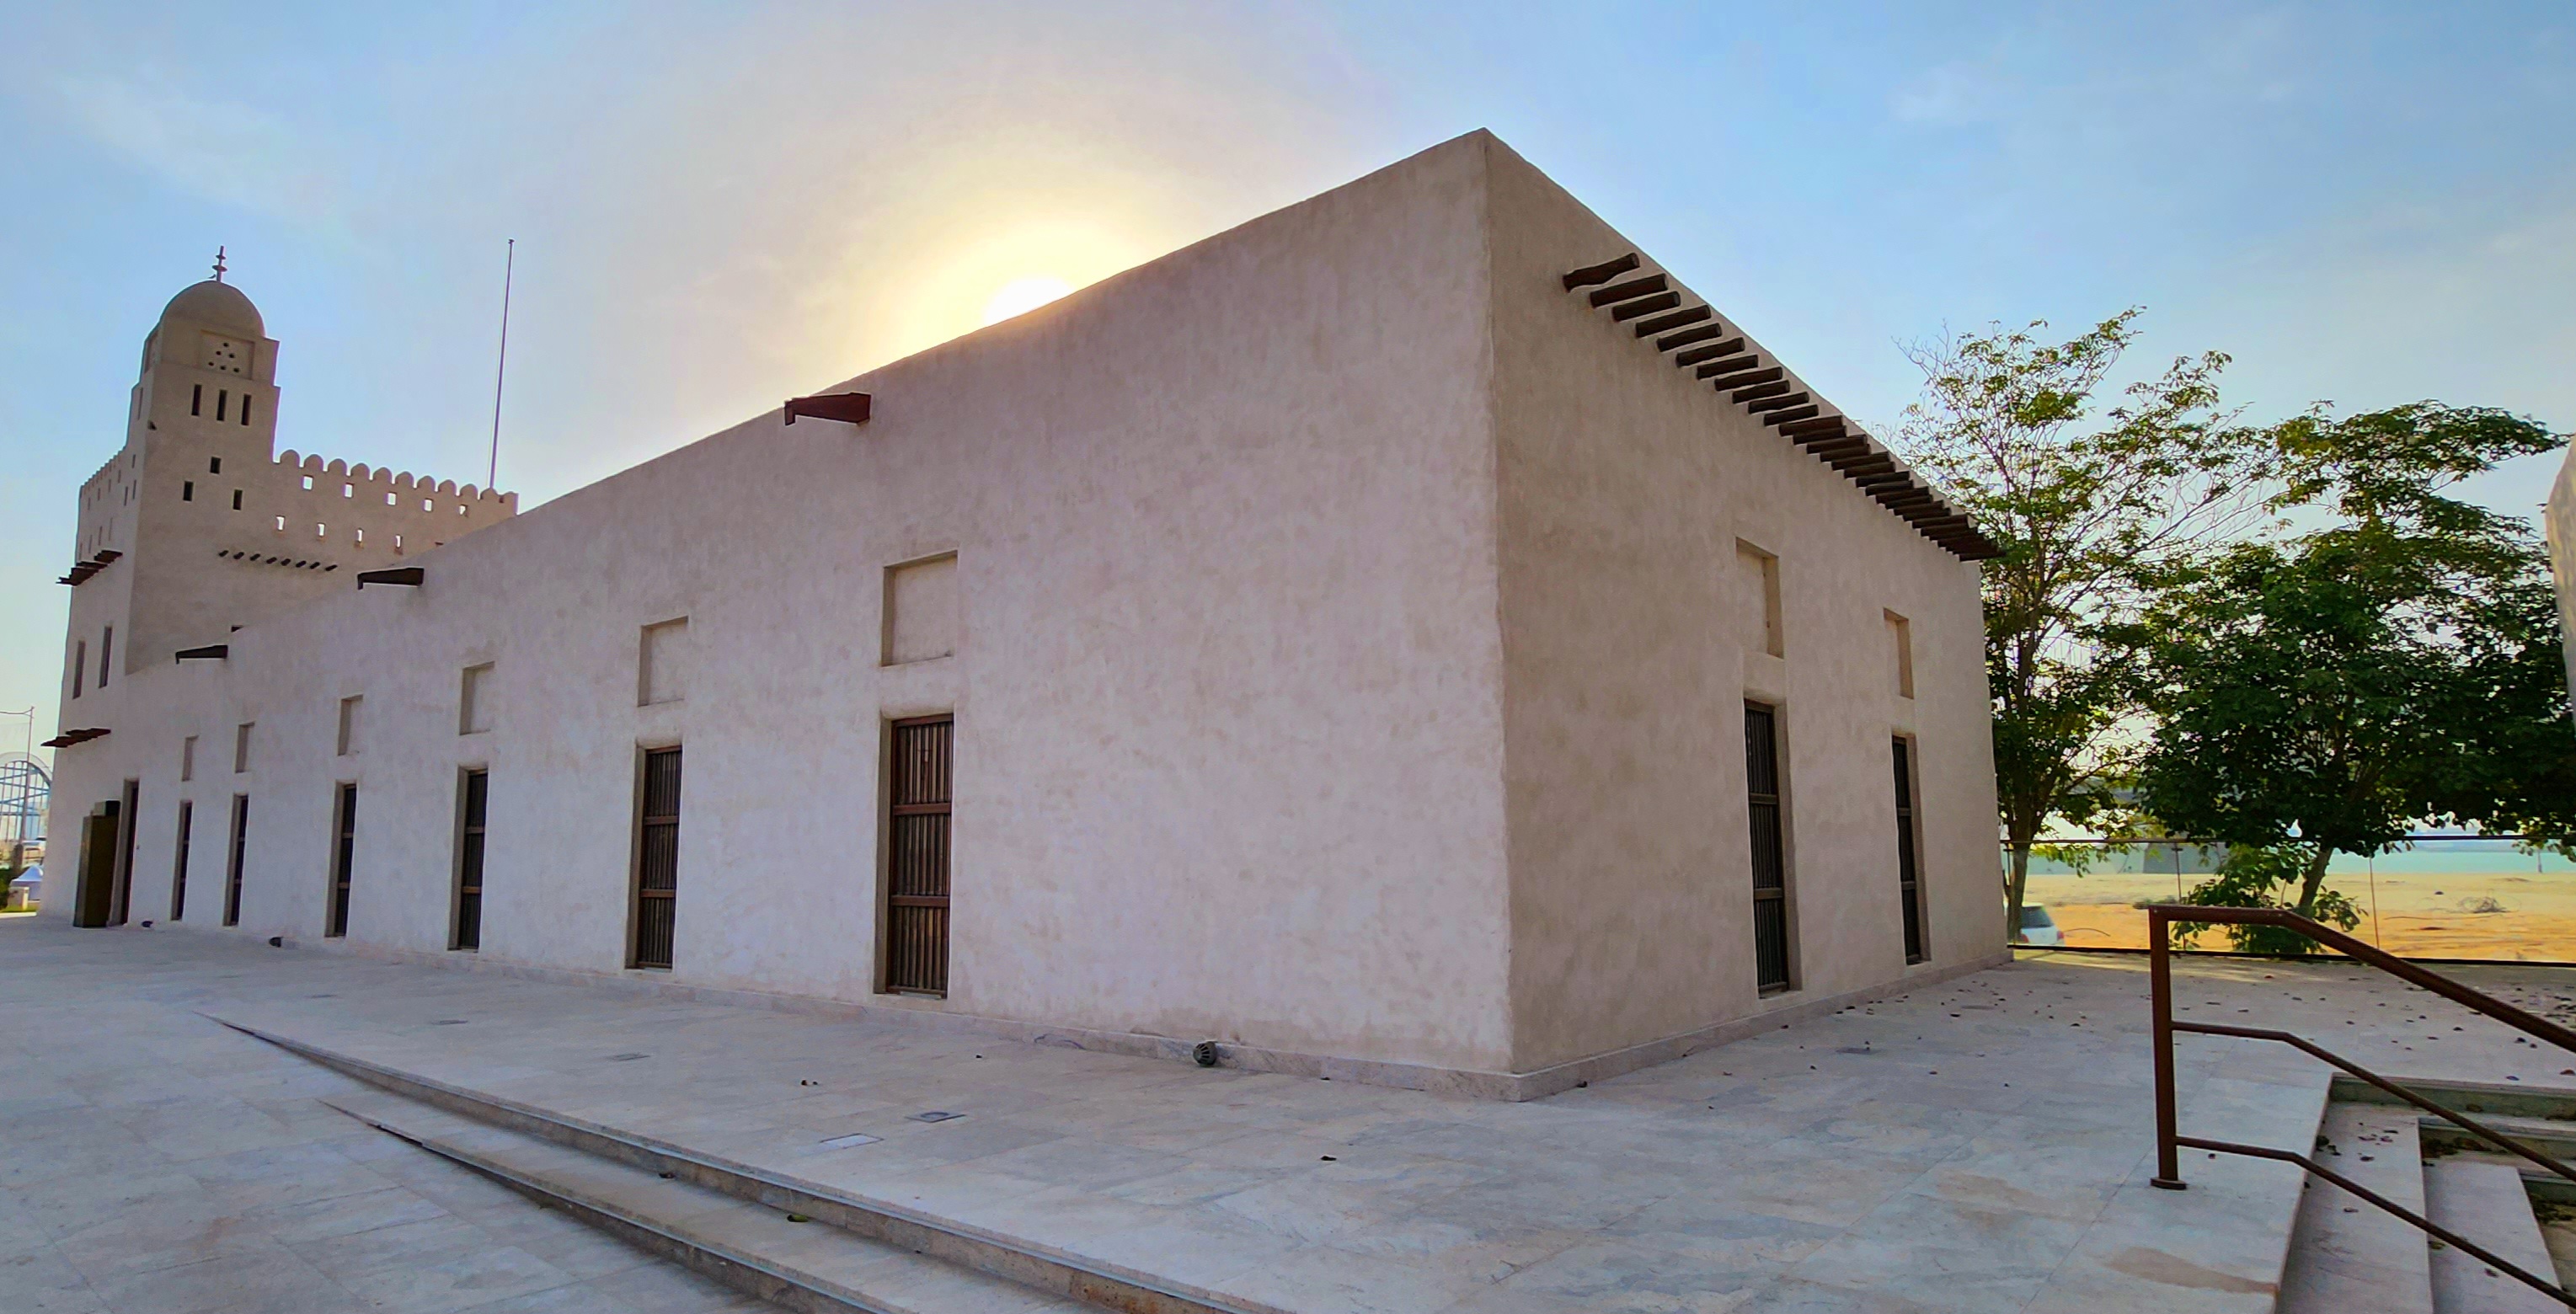 One of the remaining old structures of Abu Dhabi's Al-Maqtaa area